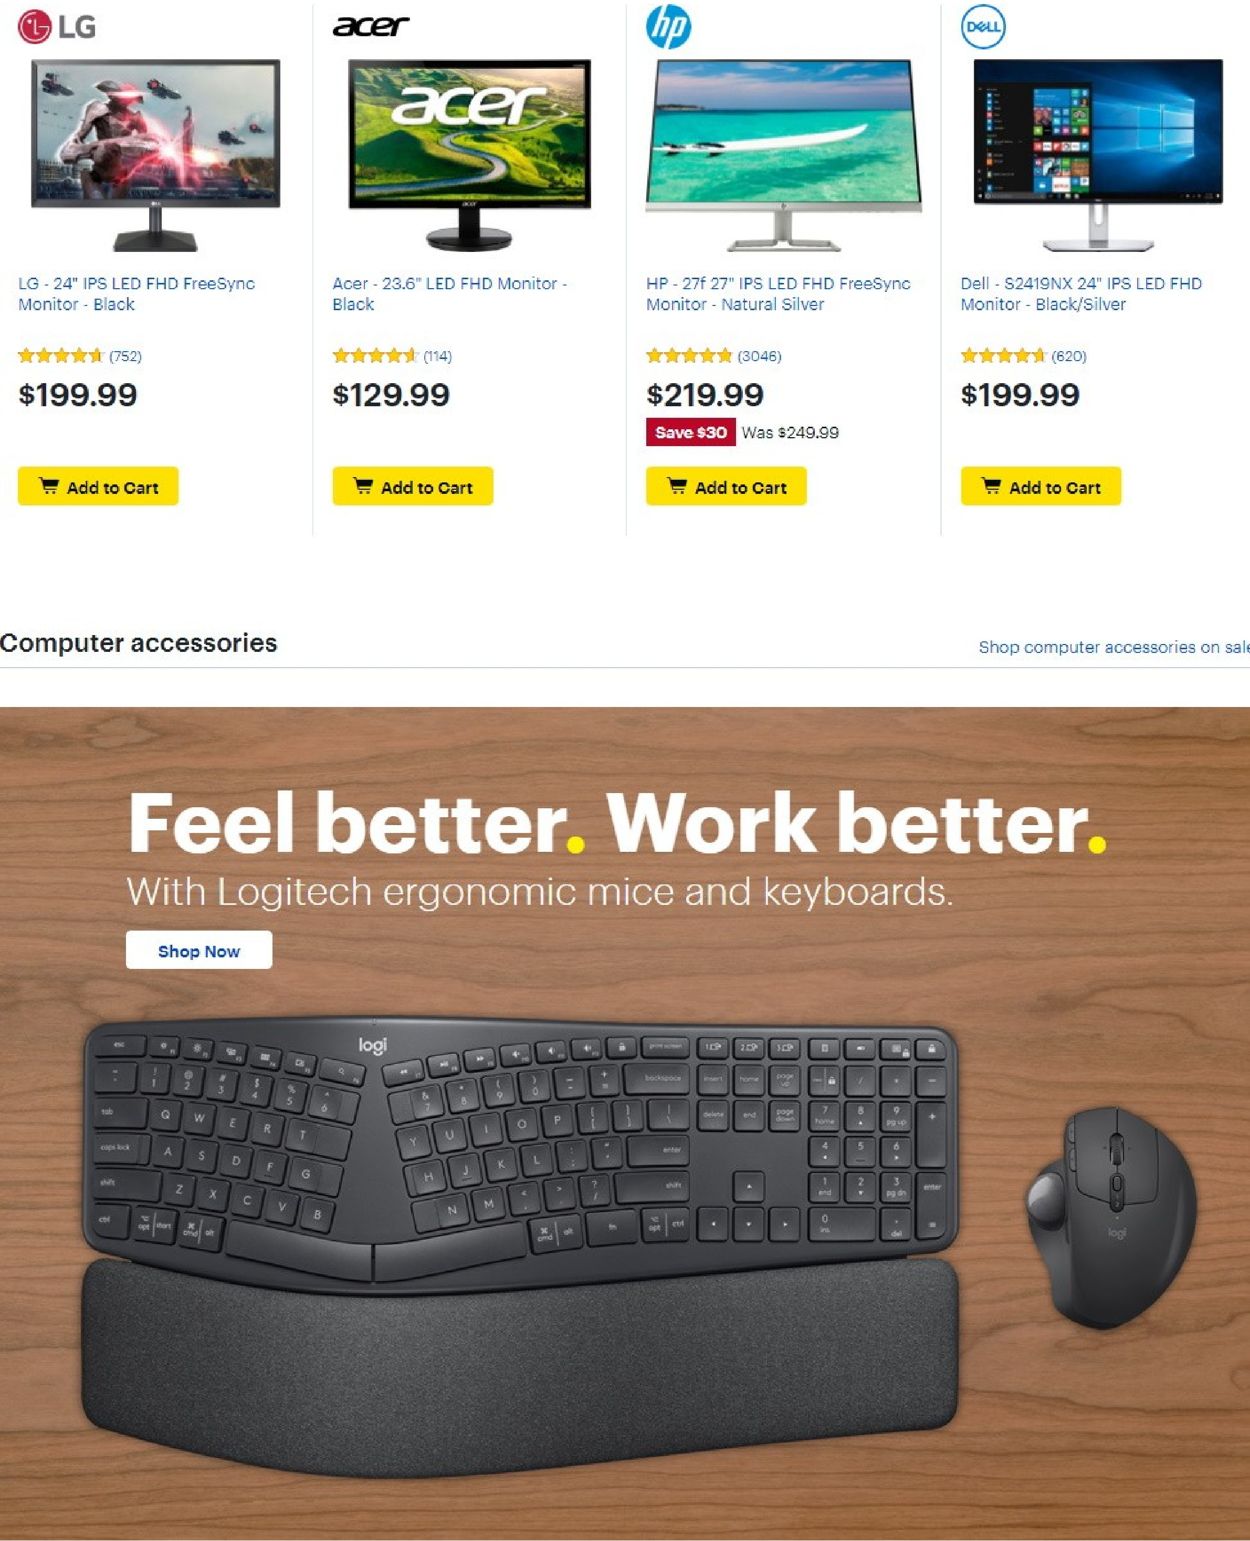 Best Buy Current weekly ad 08/28 - 09/03/2020 [4] - frequent-ads.com